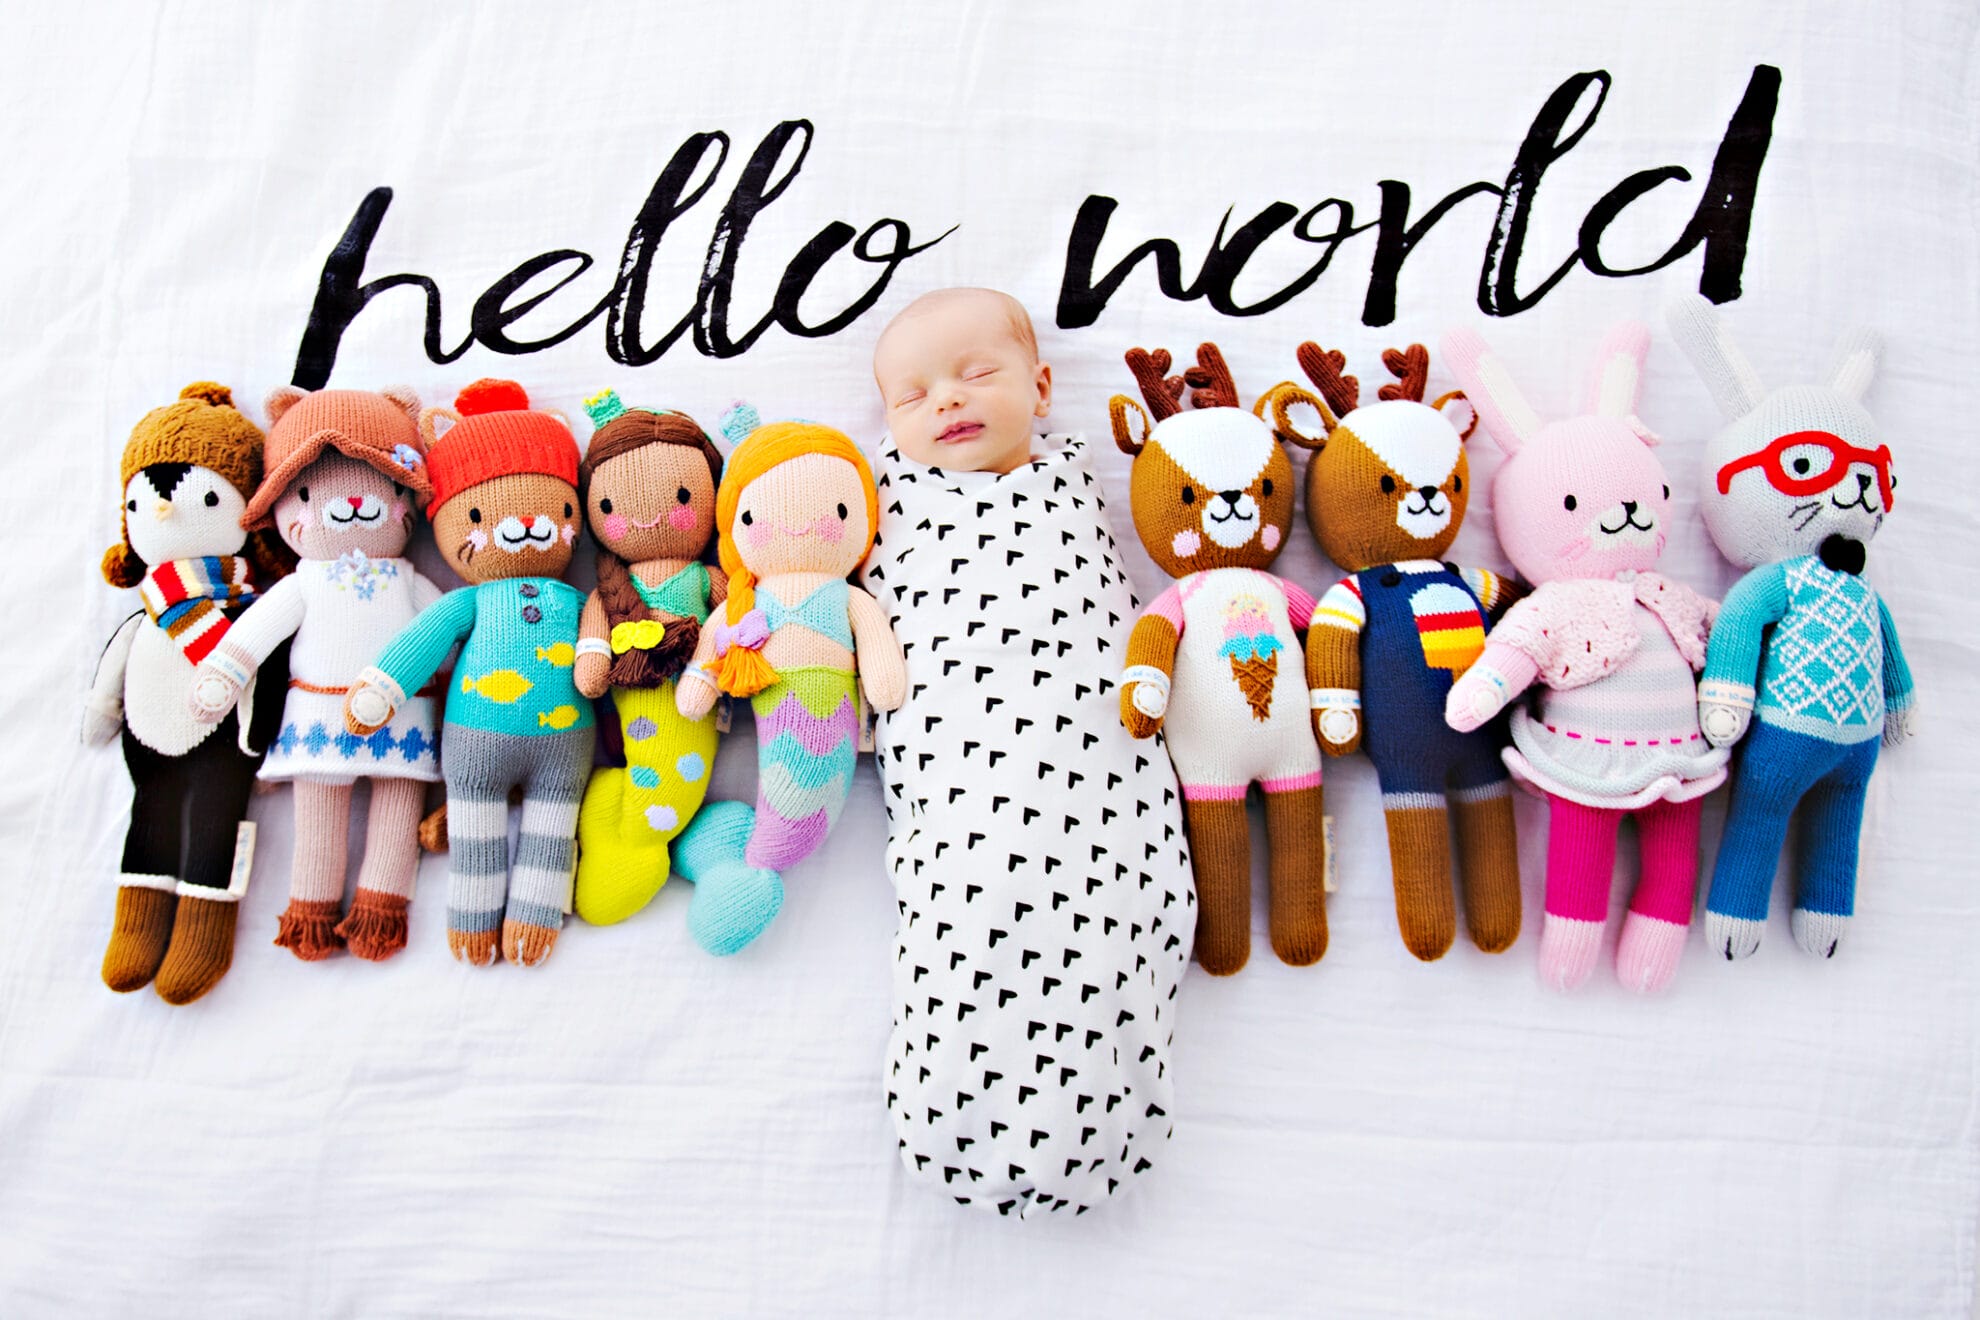 The purchase of each hand-knit and stuffed cuddle+kind doll feeds 10 hungry children in need, through a partnership with World Food Program USA.